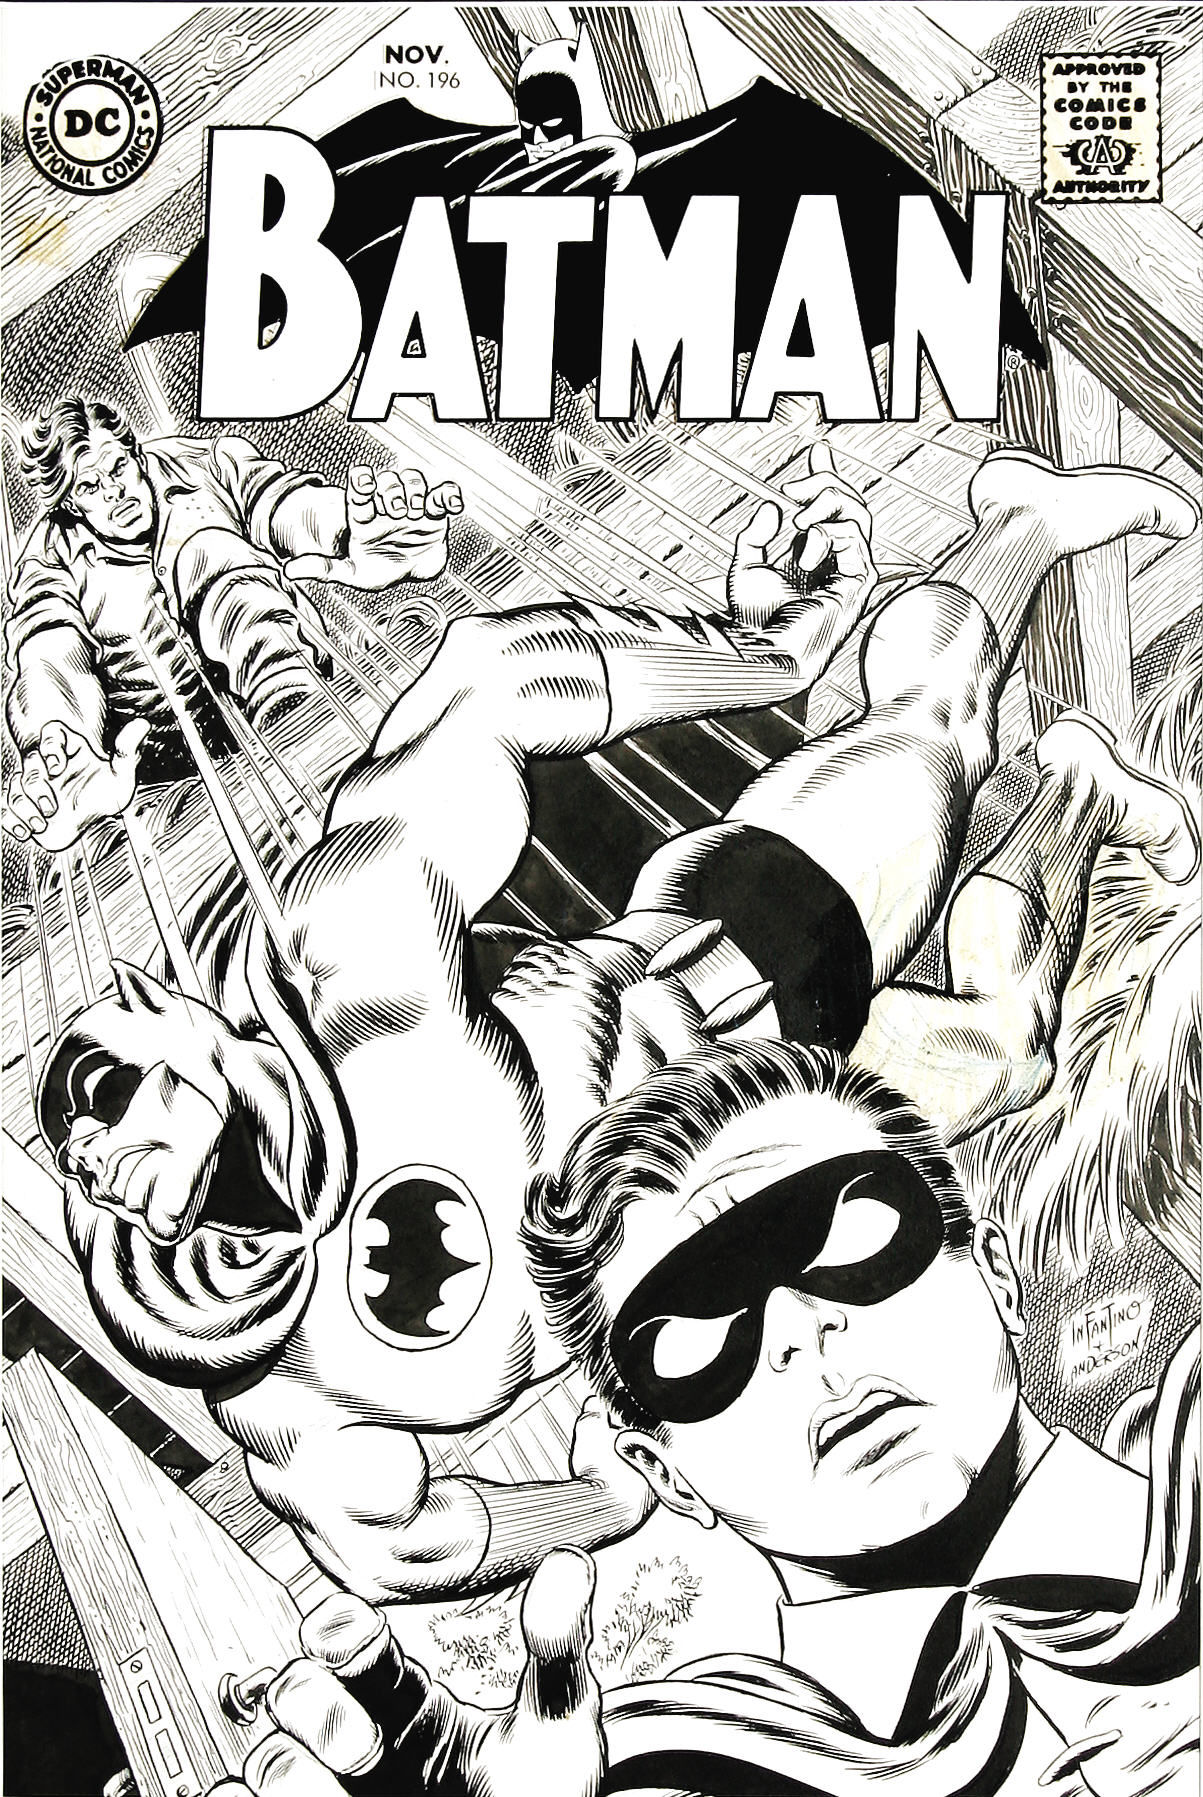 Cover Art for Batman #196 by Carmine Infantino and Murphy Anderson Sold For: $59,750